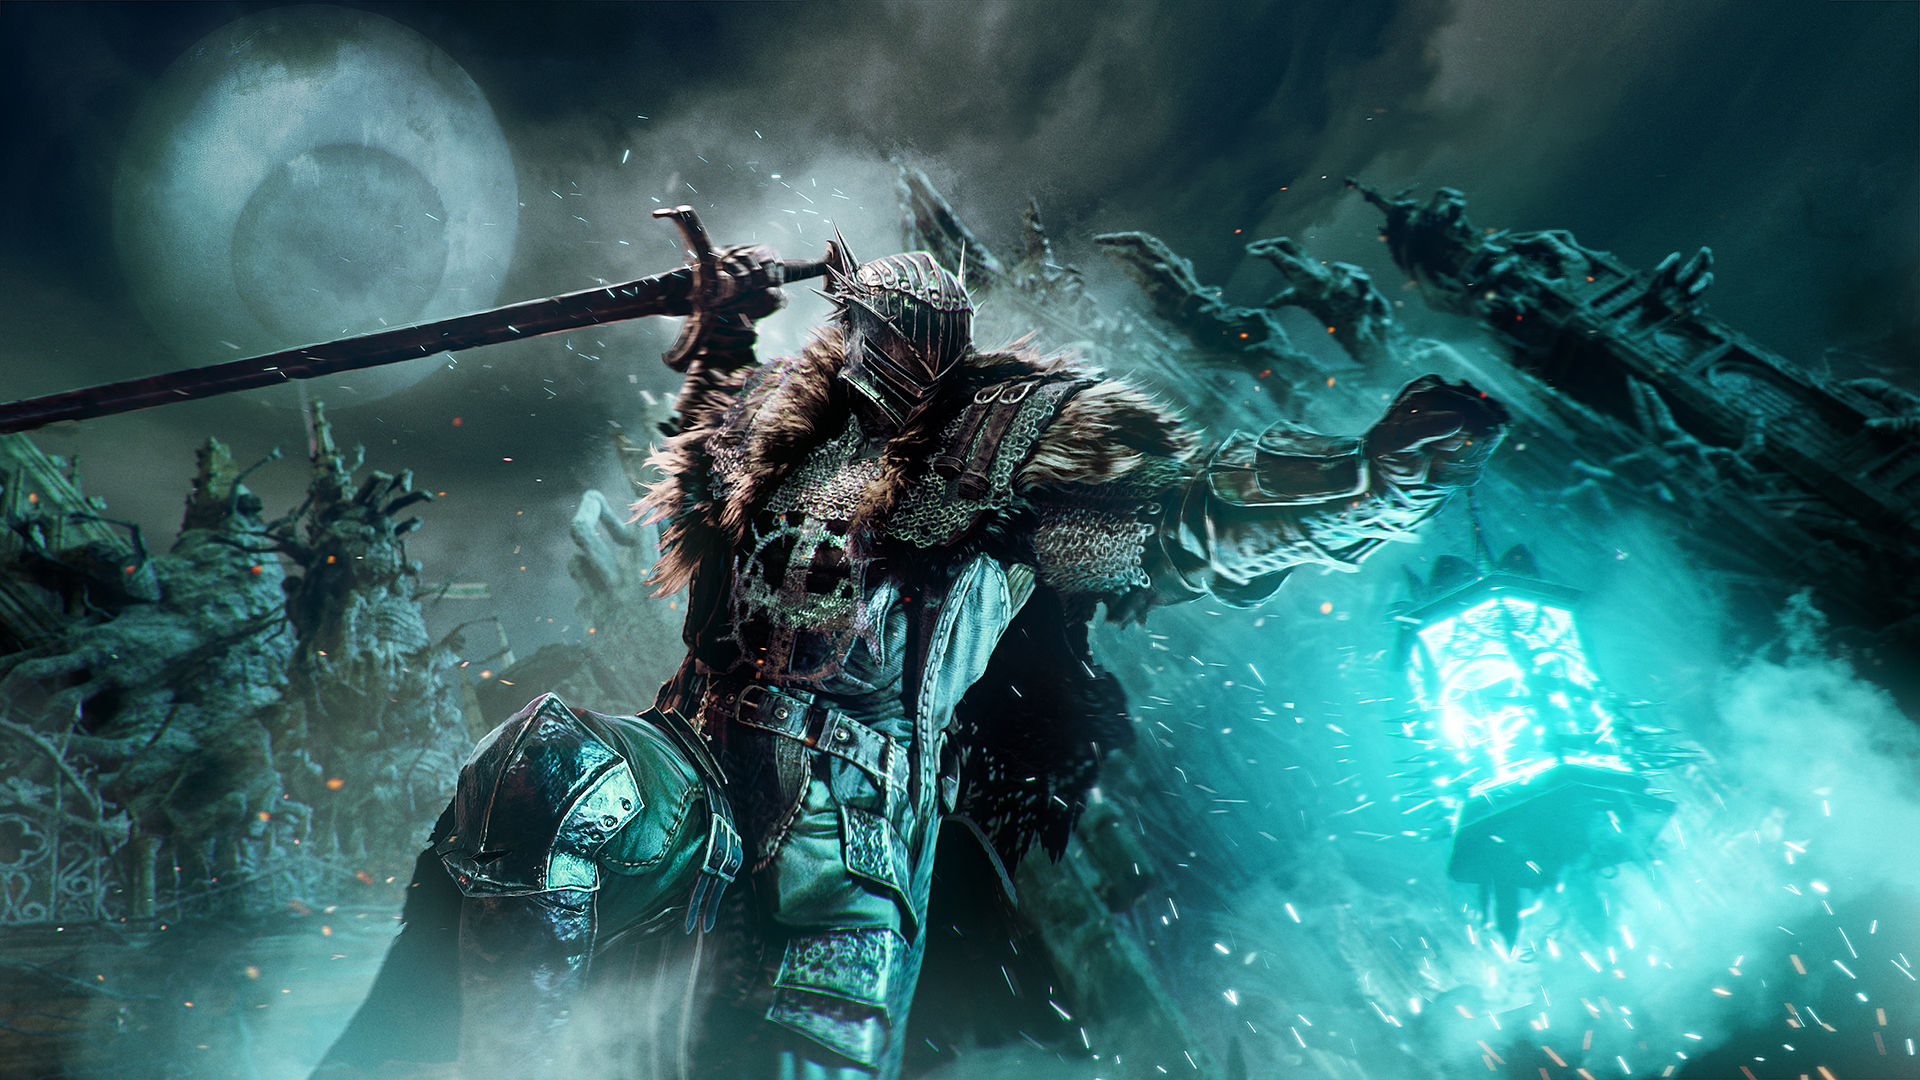 Workarounds arrive for Lords of the Fallen crashes and bugs on PC